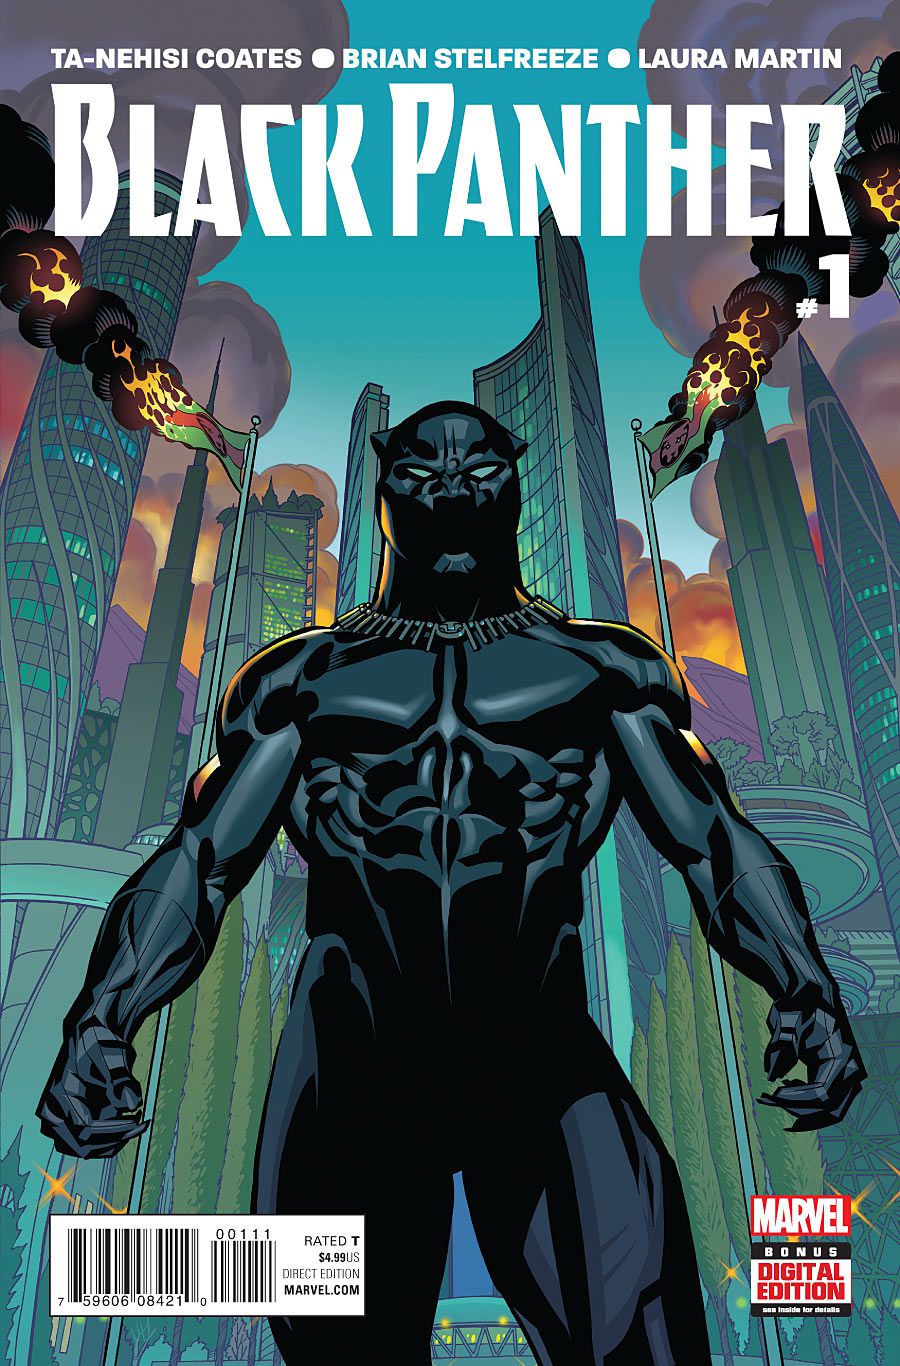 T’Challa stands in costume before two burning Wakandan flags in the capital of Wakanda, on the cover of Black Panther #1, Marvel Comics (2016). 